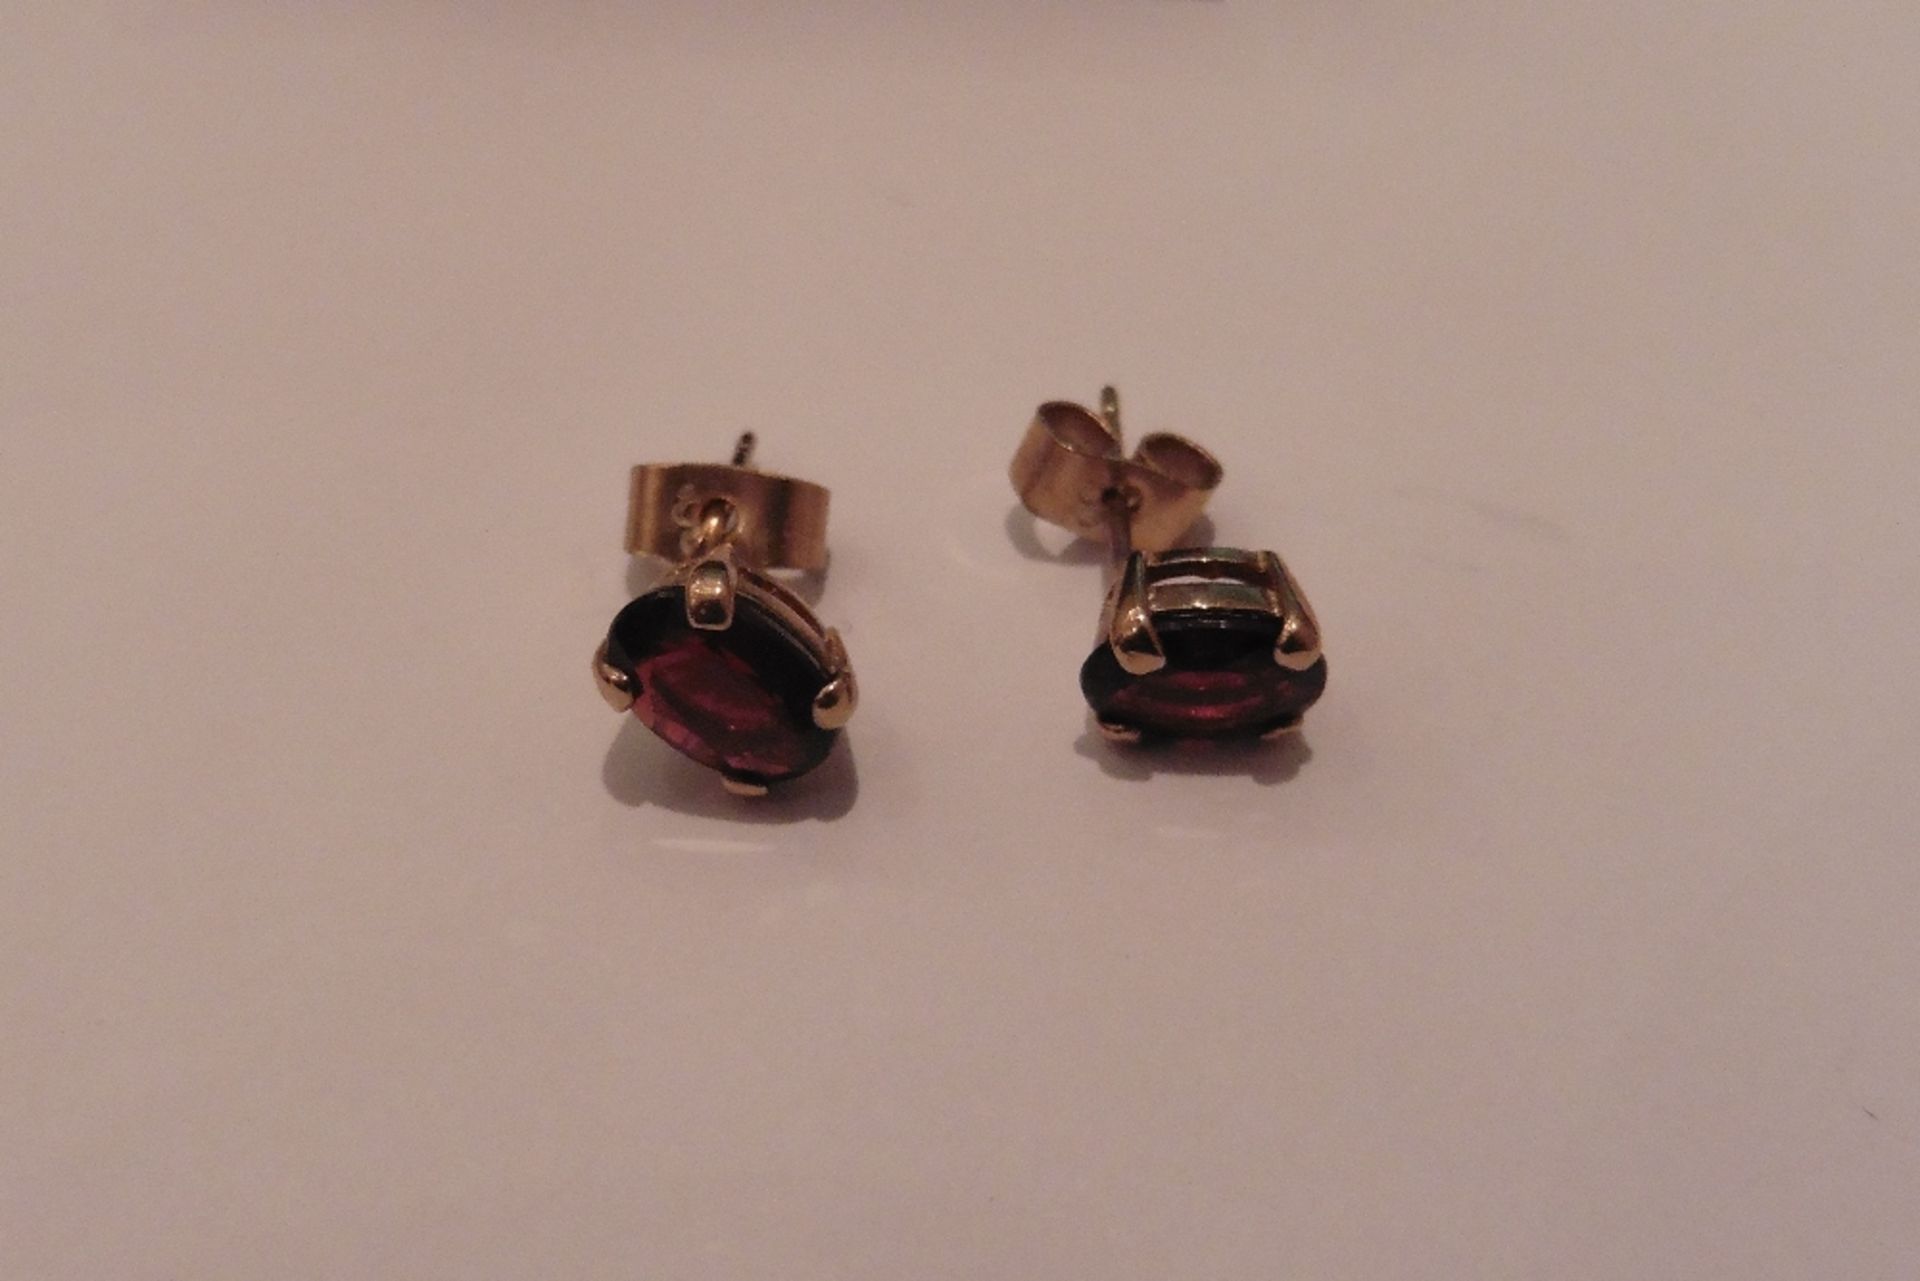 Pre-owned 9ct yellow gold red garnet stud earrings with oval cut stones, simple claw setting. Standa - Image 2 of 2